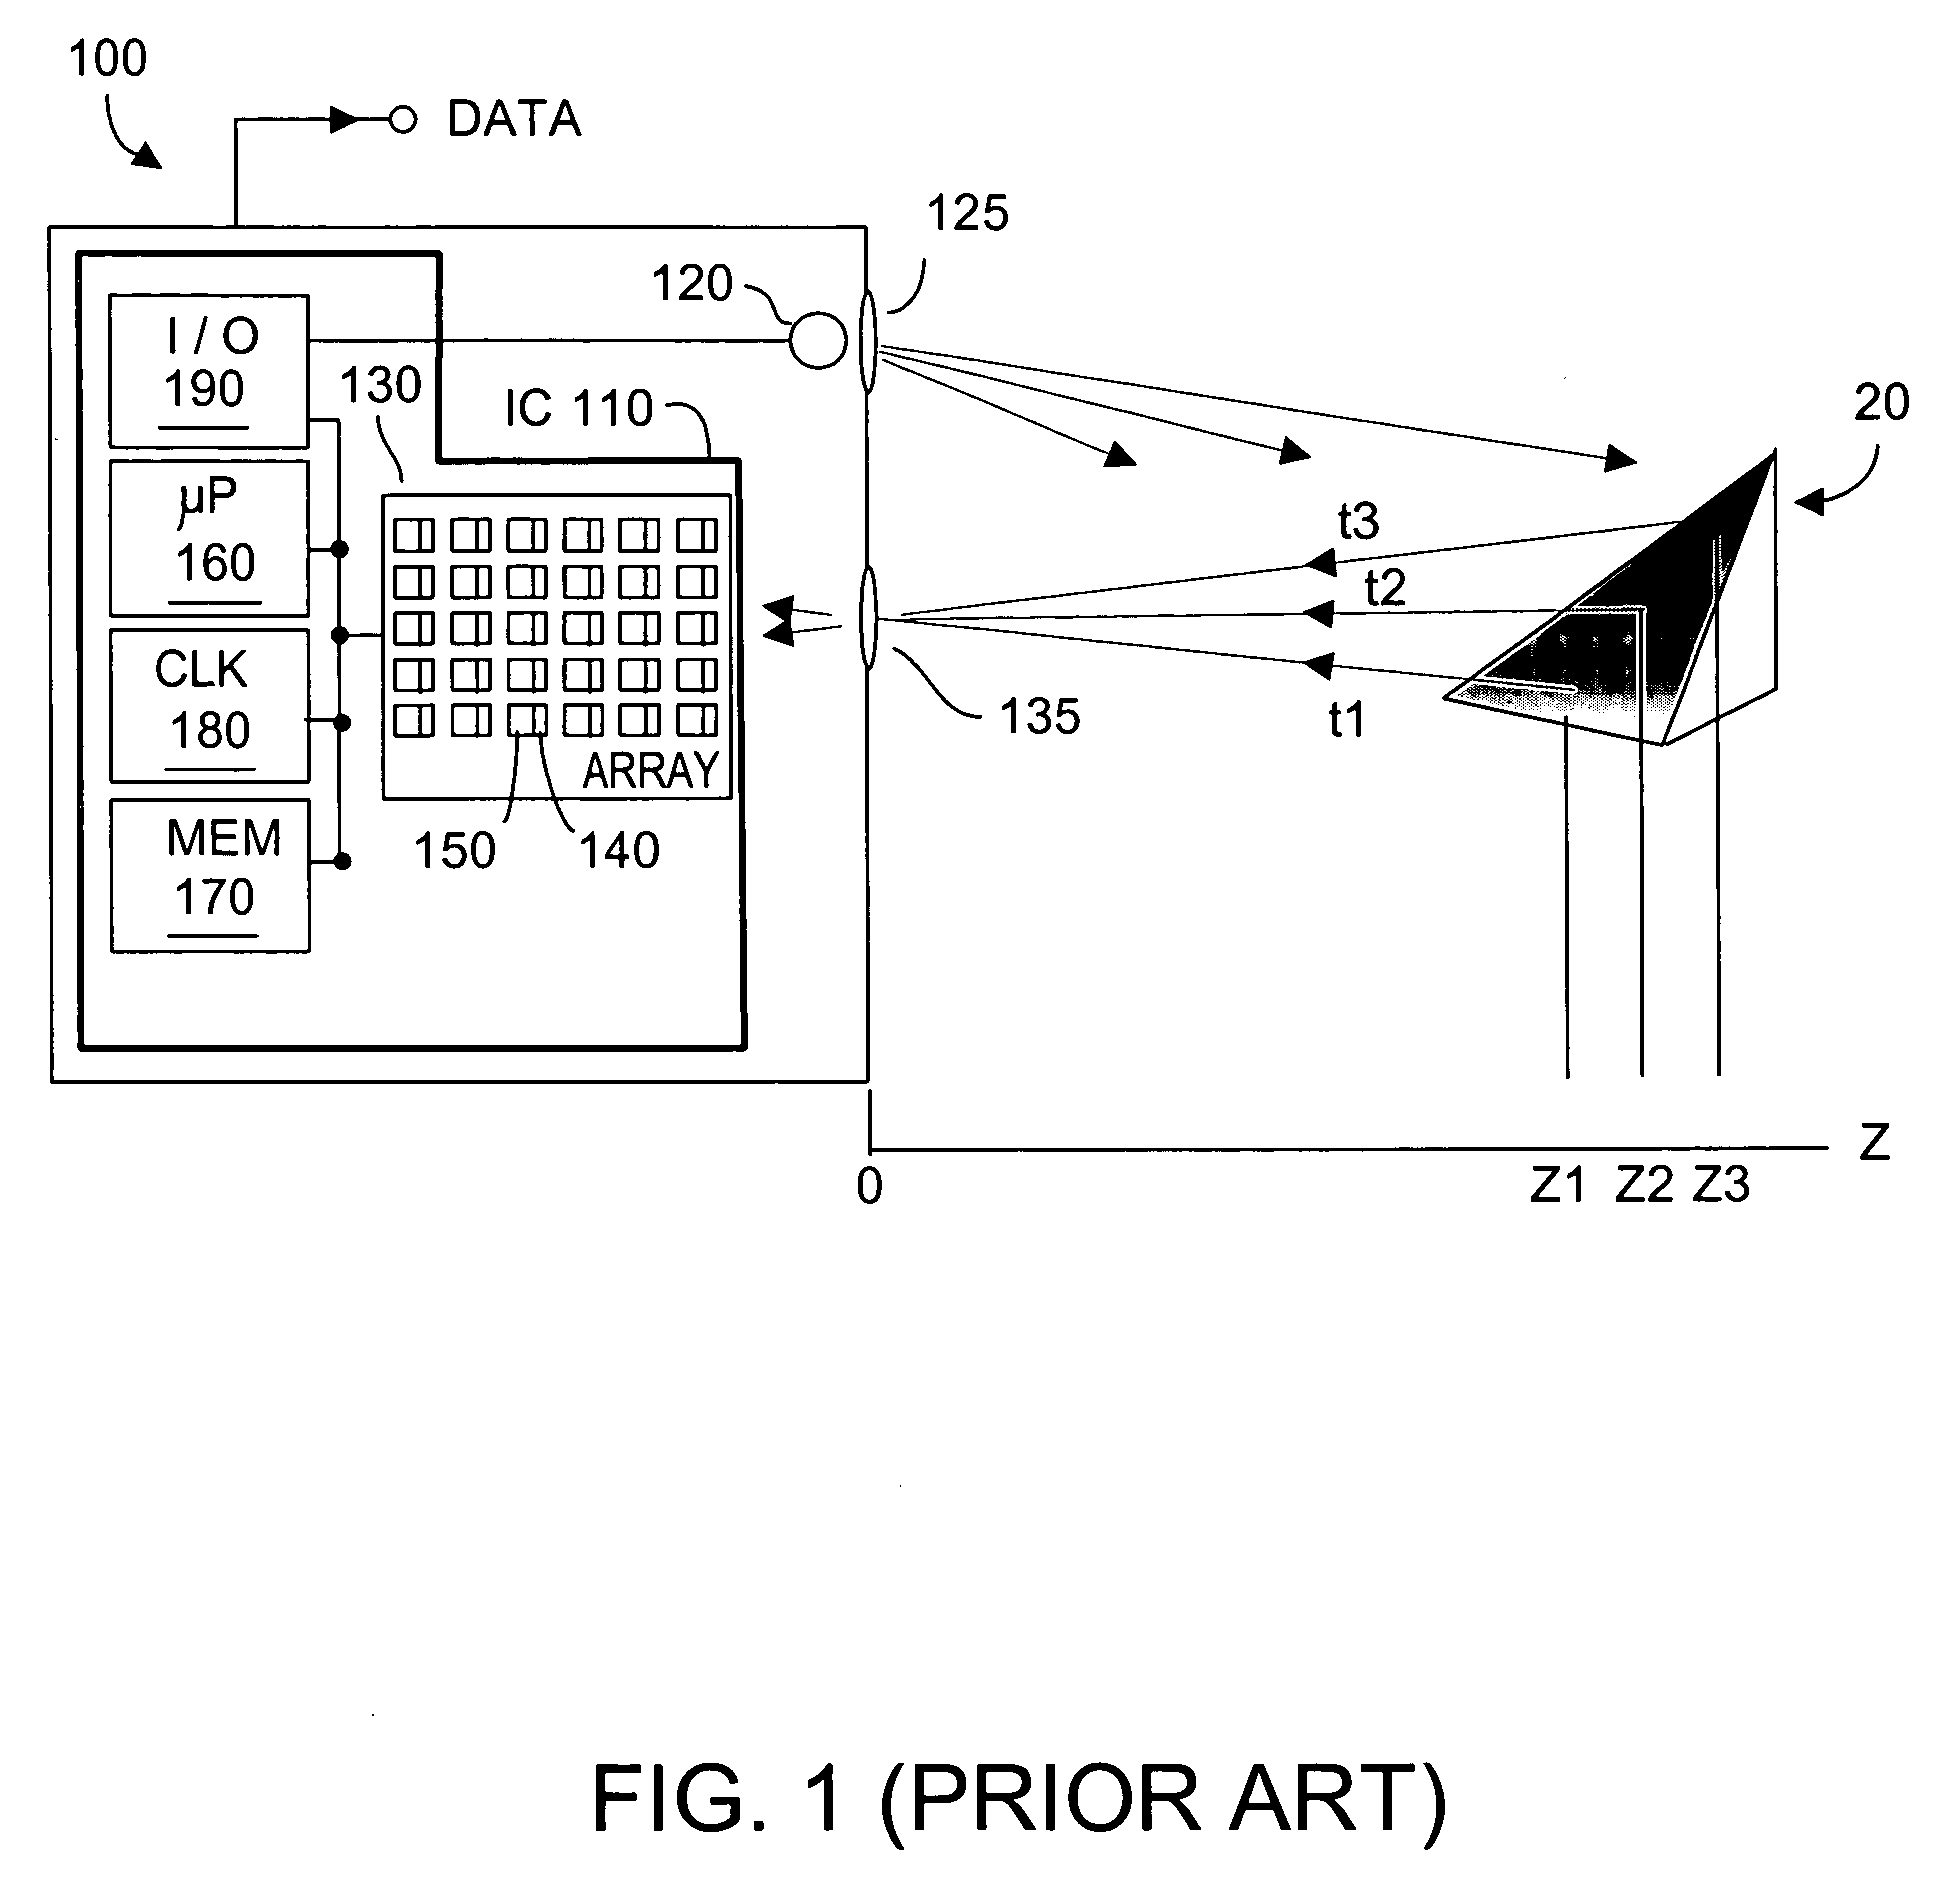 Method and system for automatic gain control of sensors in time-of-flight systems